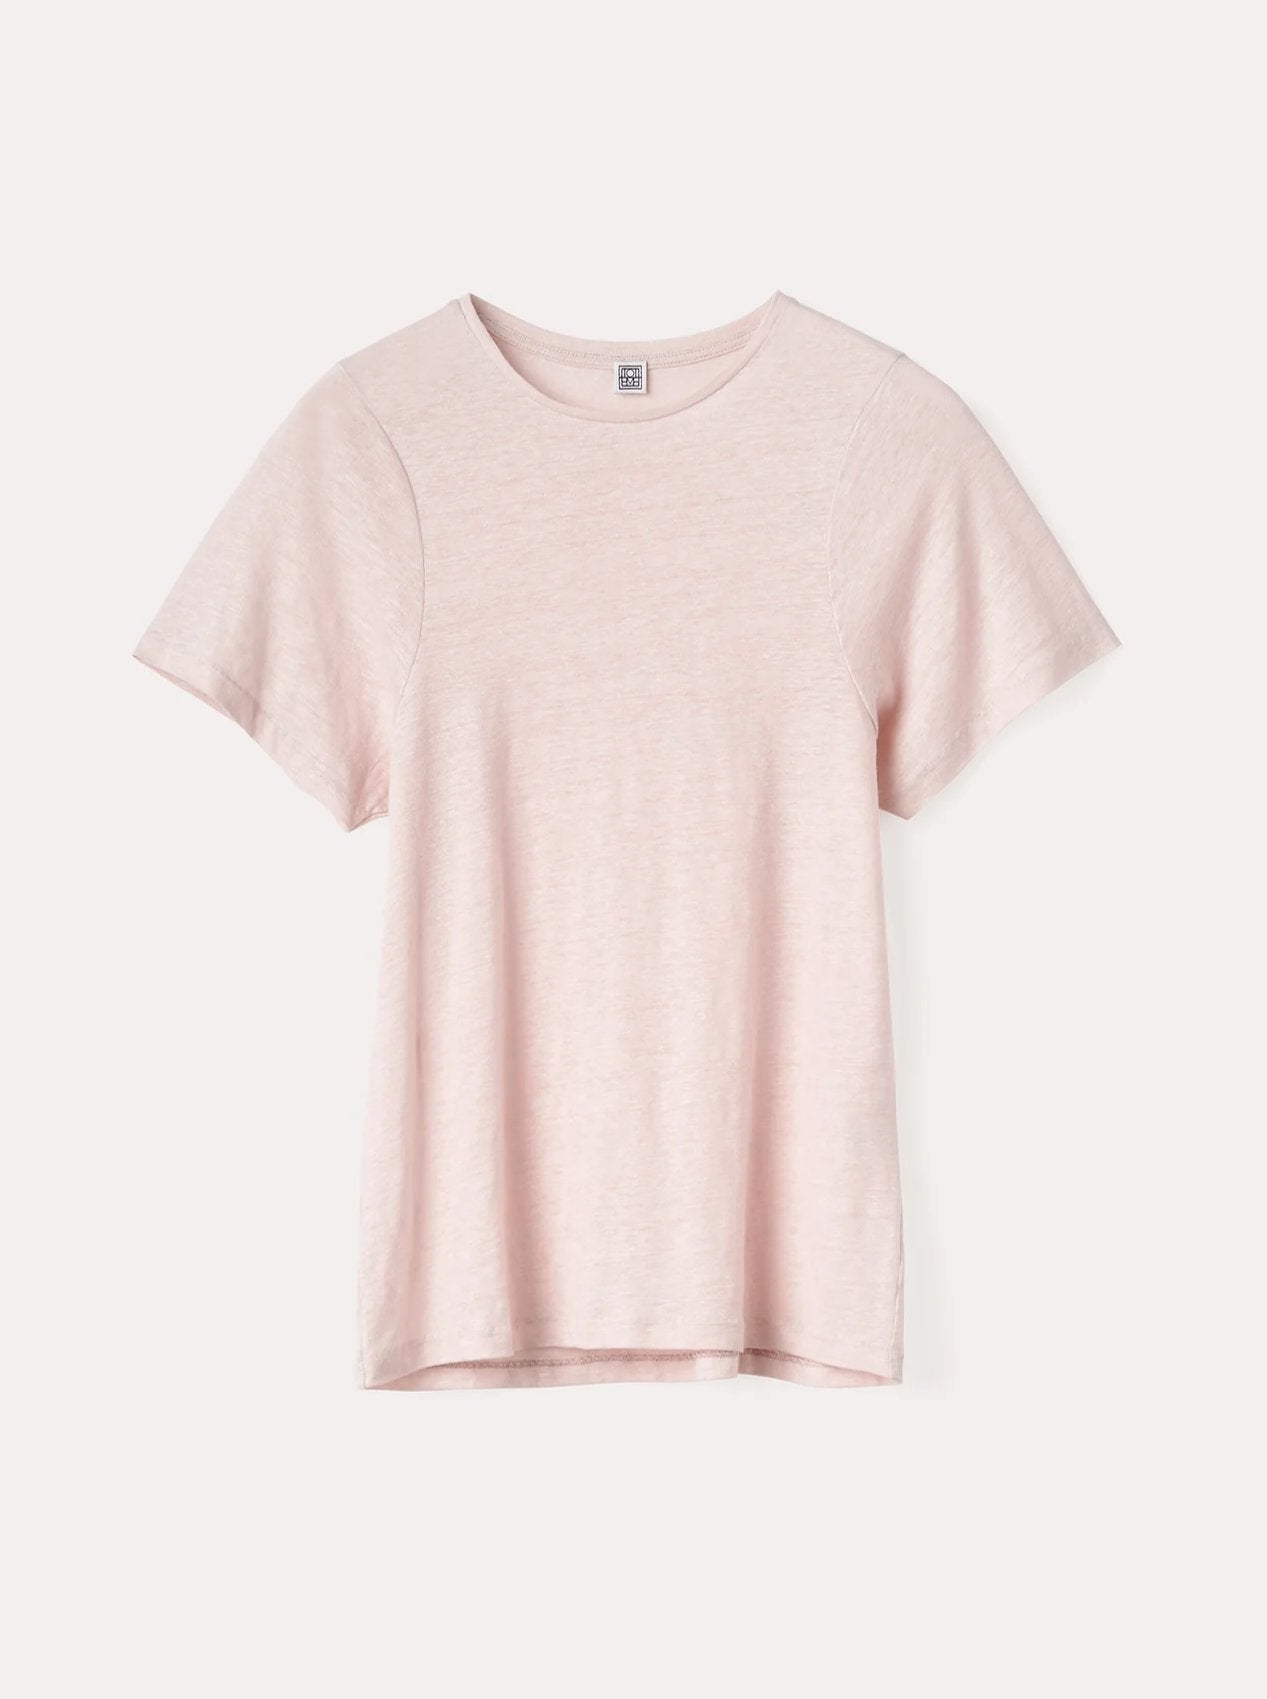 Curved Seam Tee Powder by Toteme - The Line